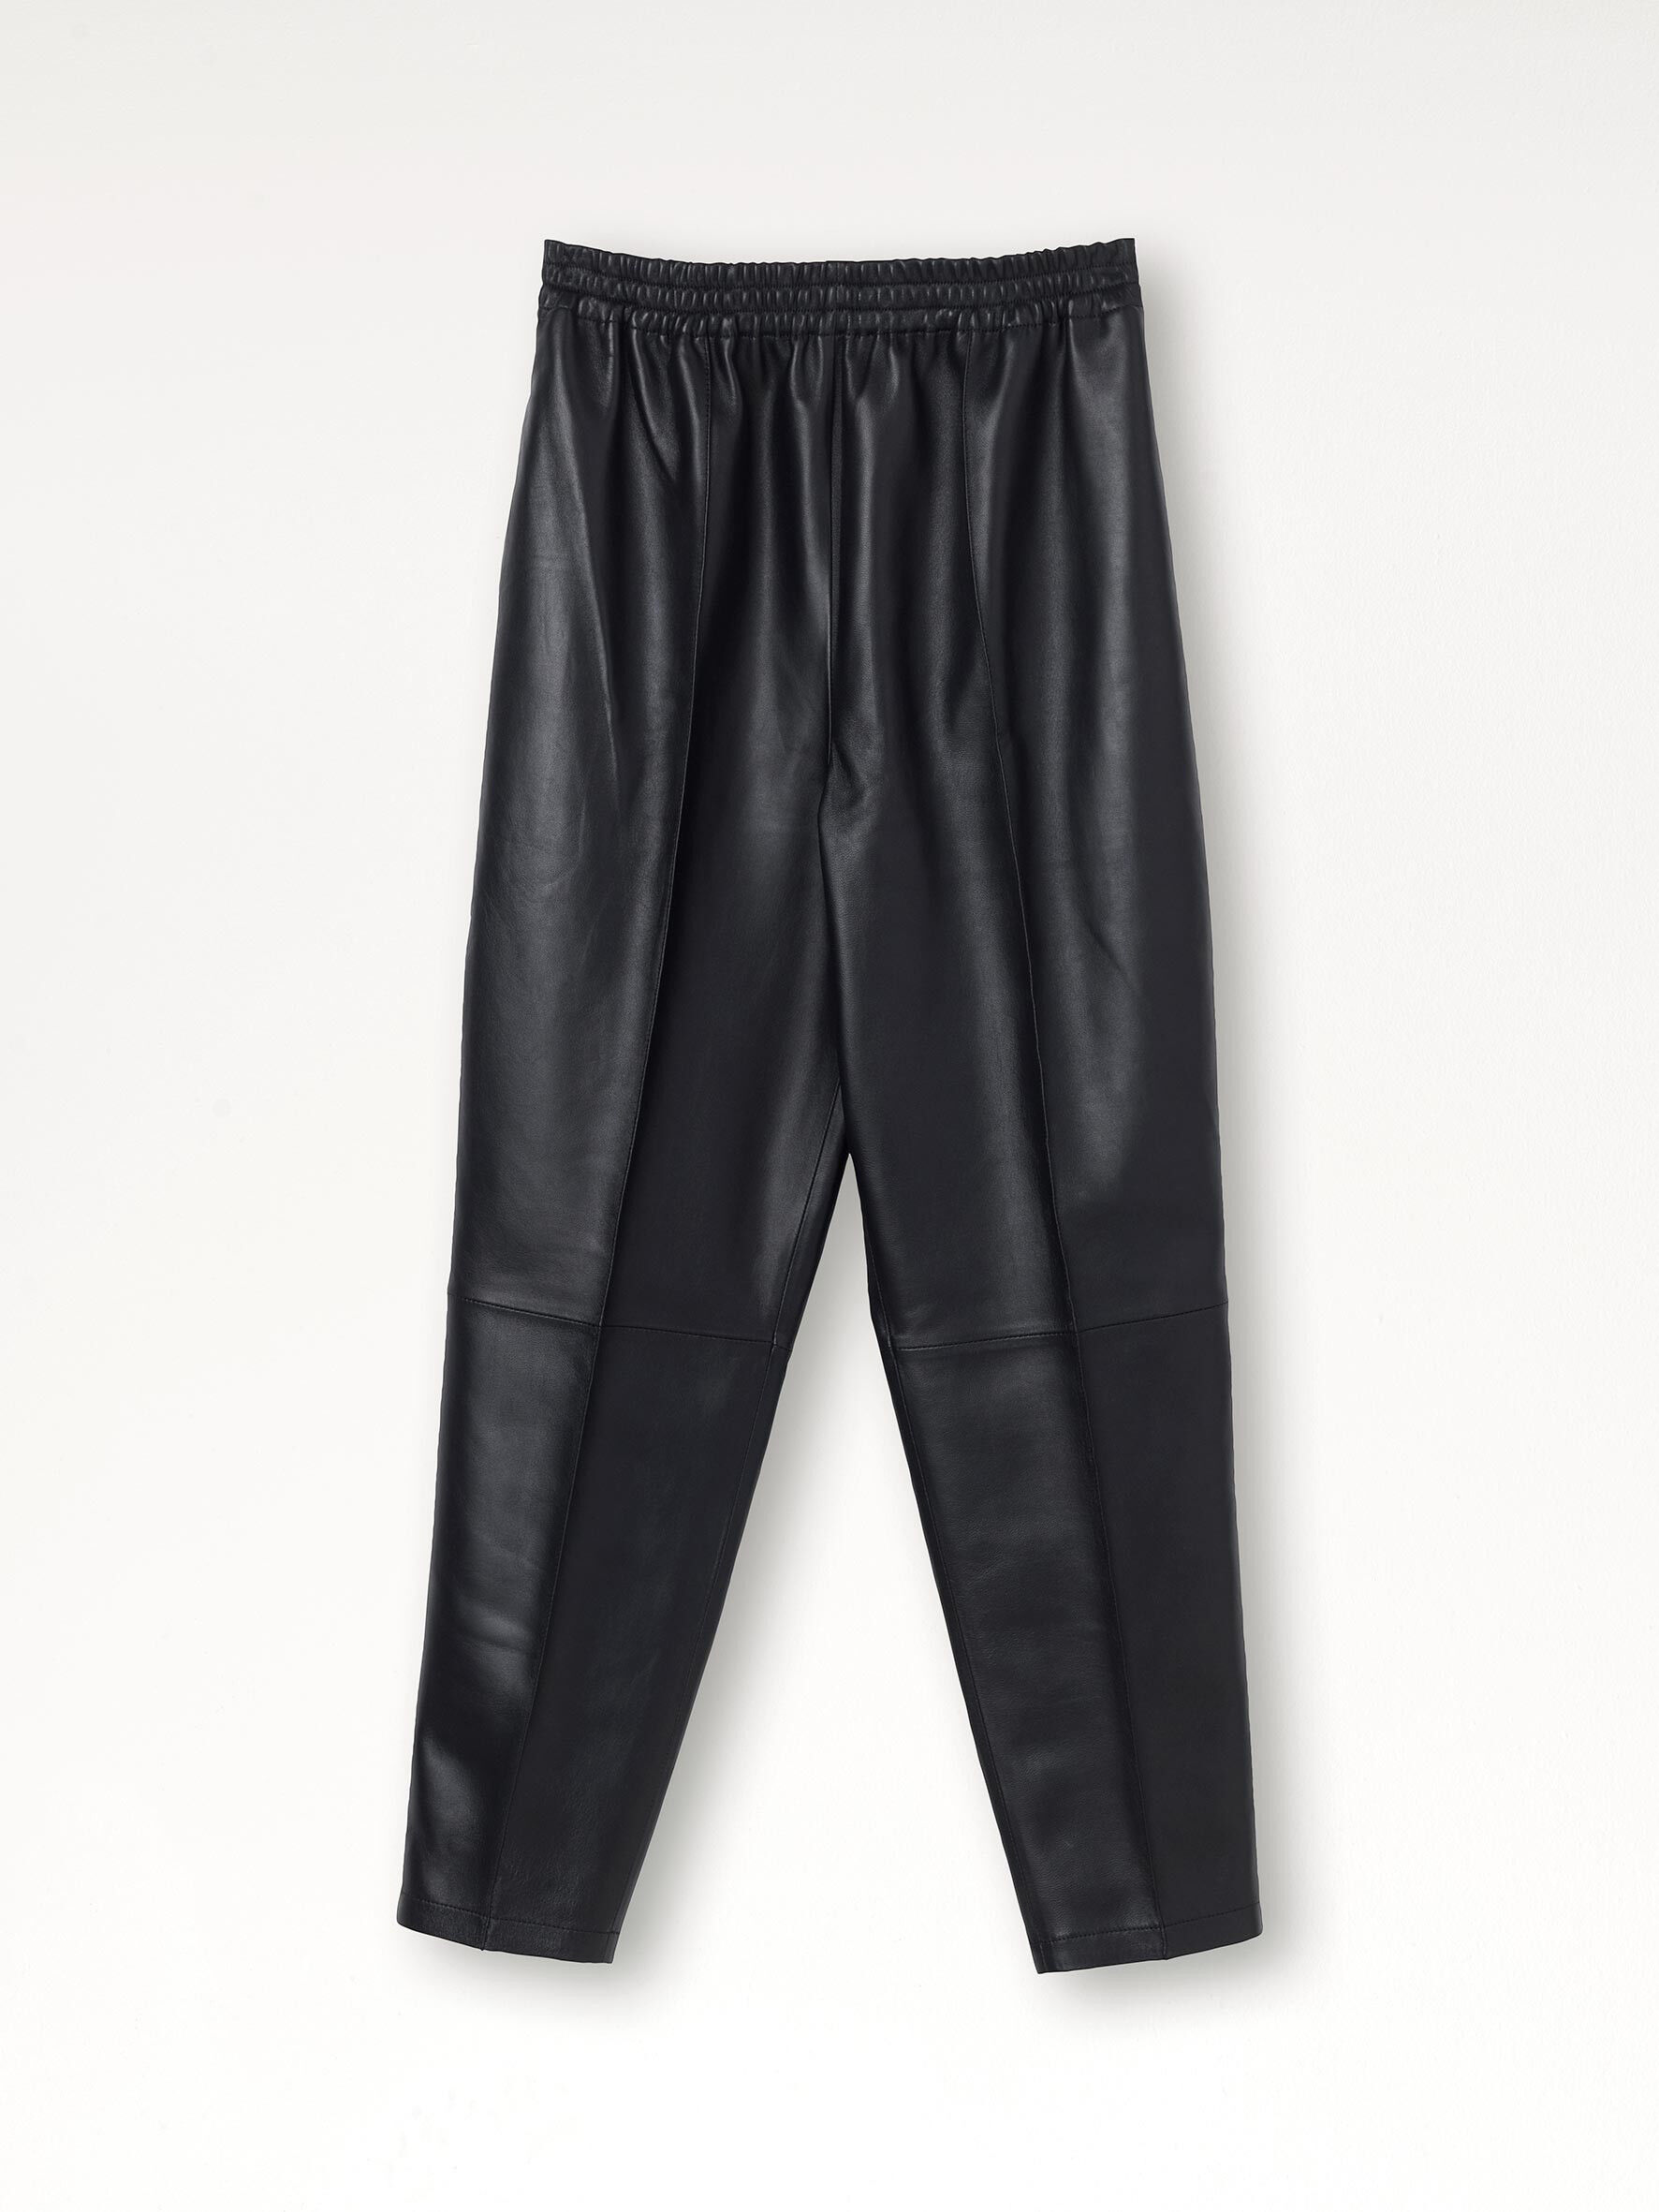 leather trousers online